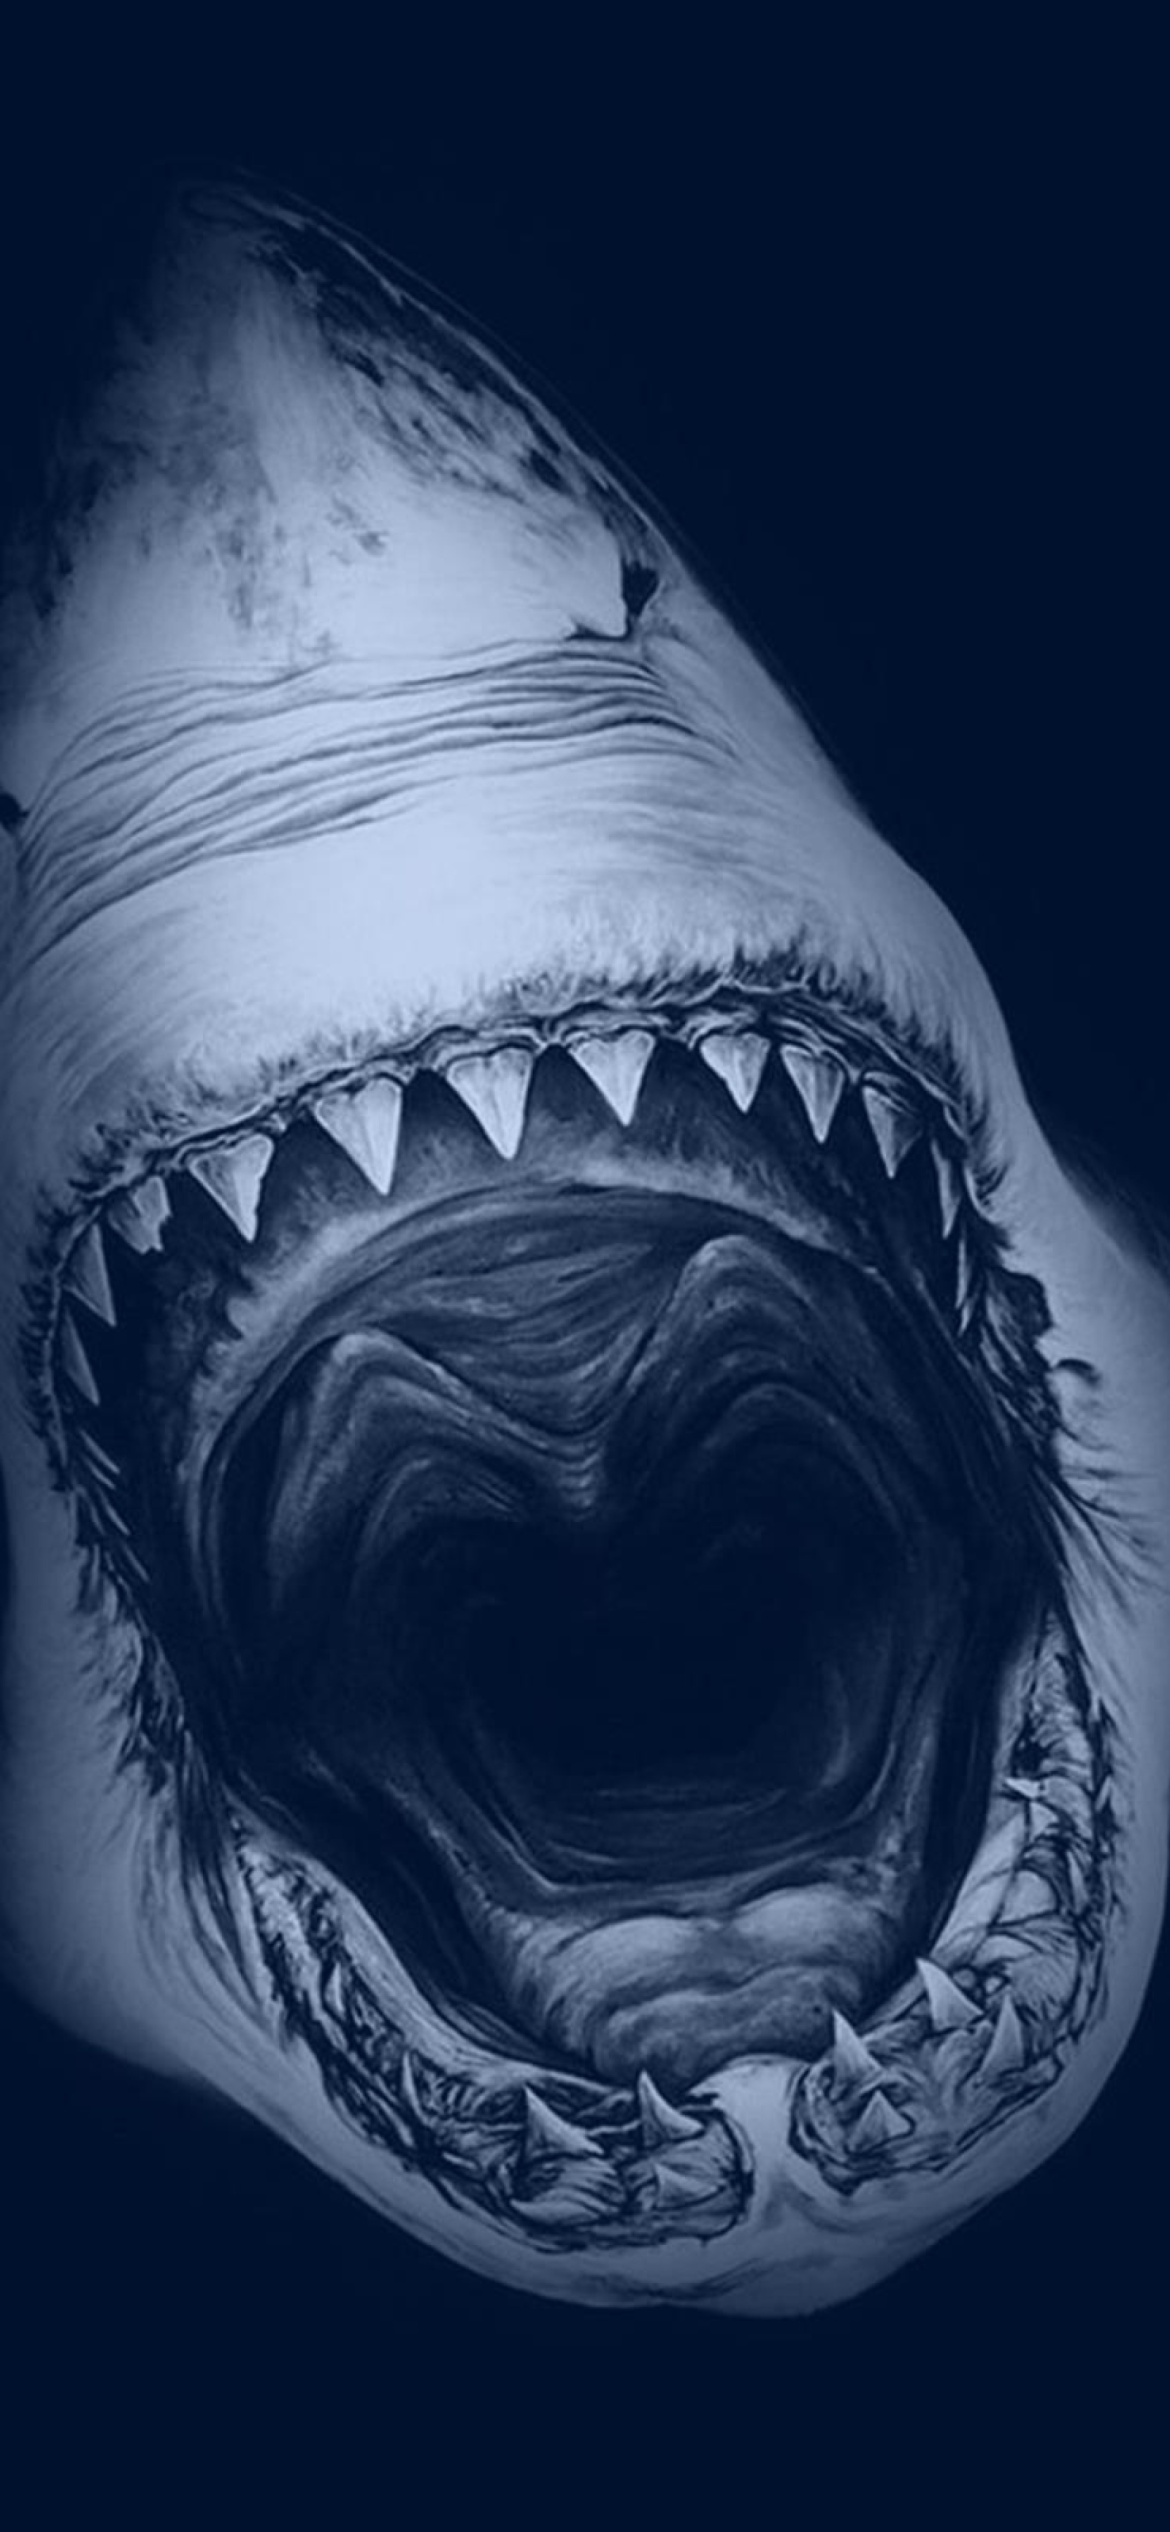 Terrifying Mouth of Shark Wallpaper for iPhone XR